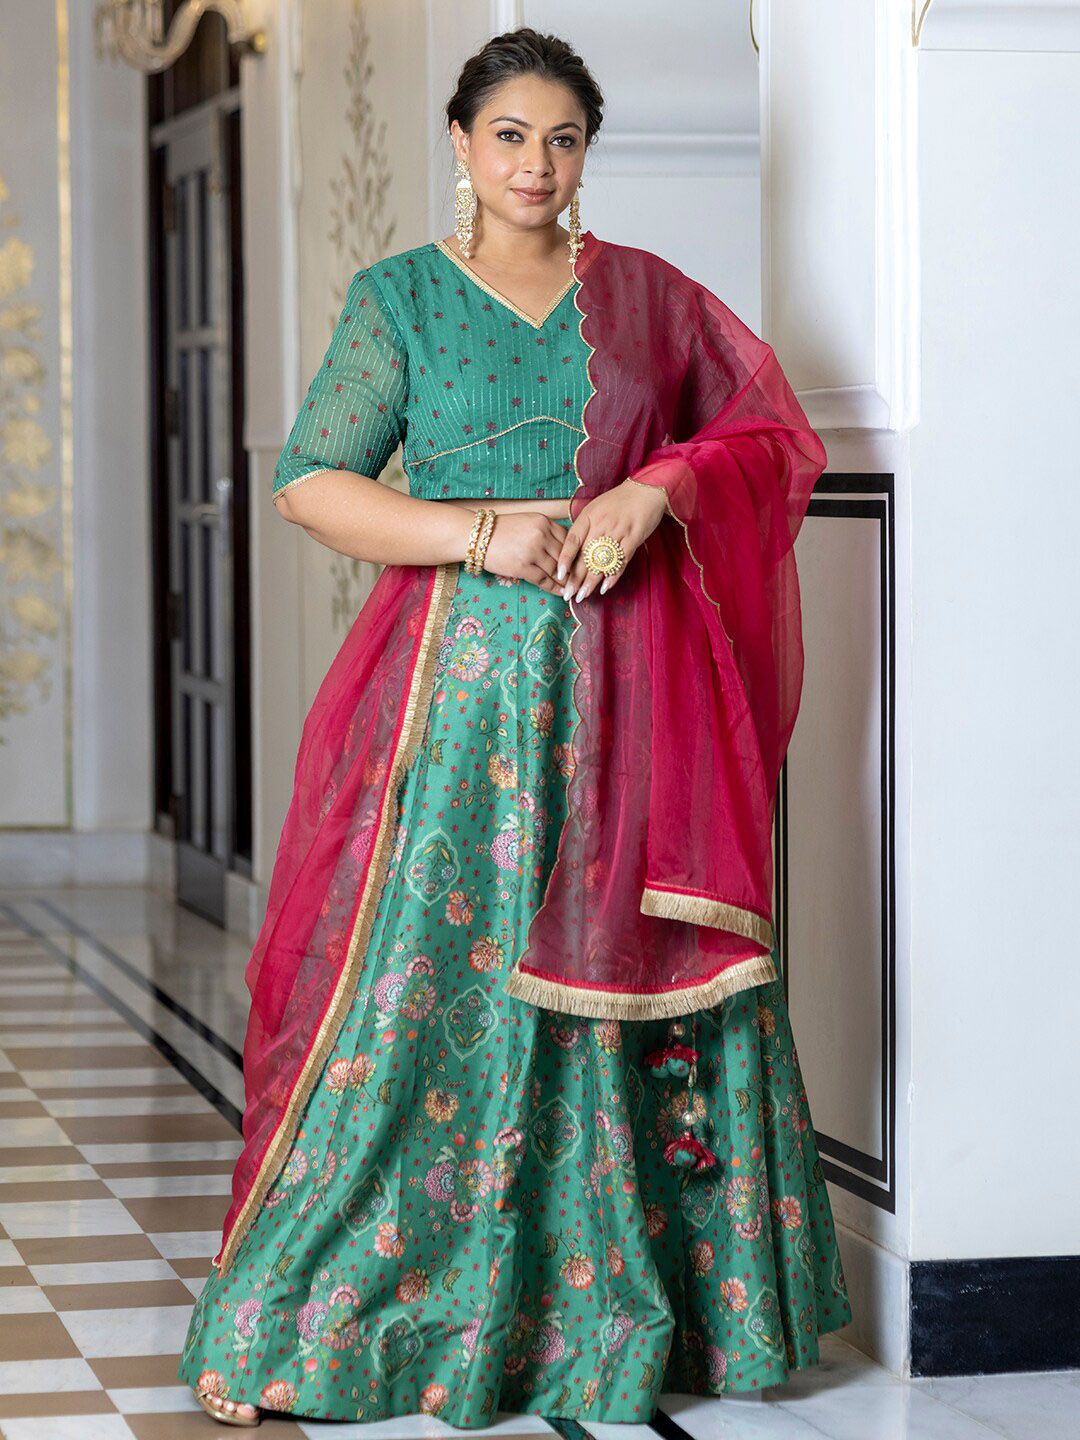 XL LOVE by Janasya Plus Size Printed Ready to Wear Lehenga & Blouse With Dupatta Price in India